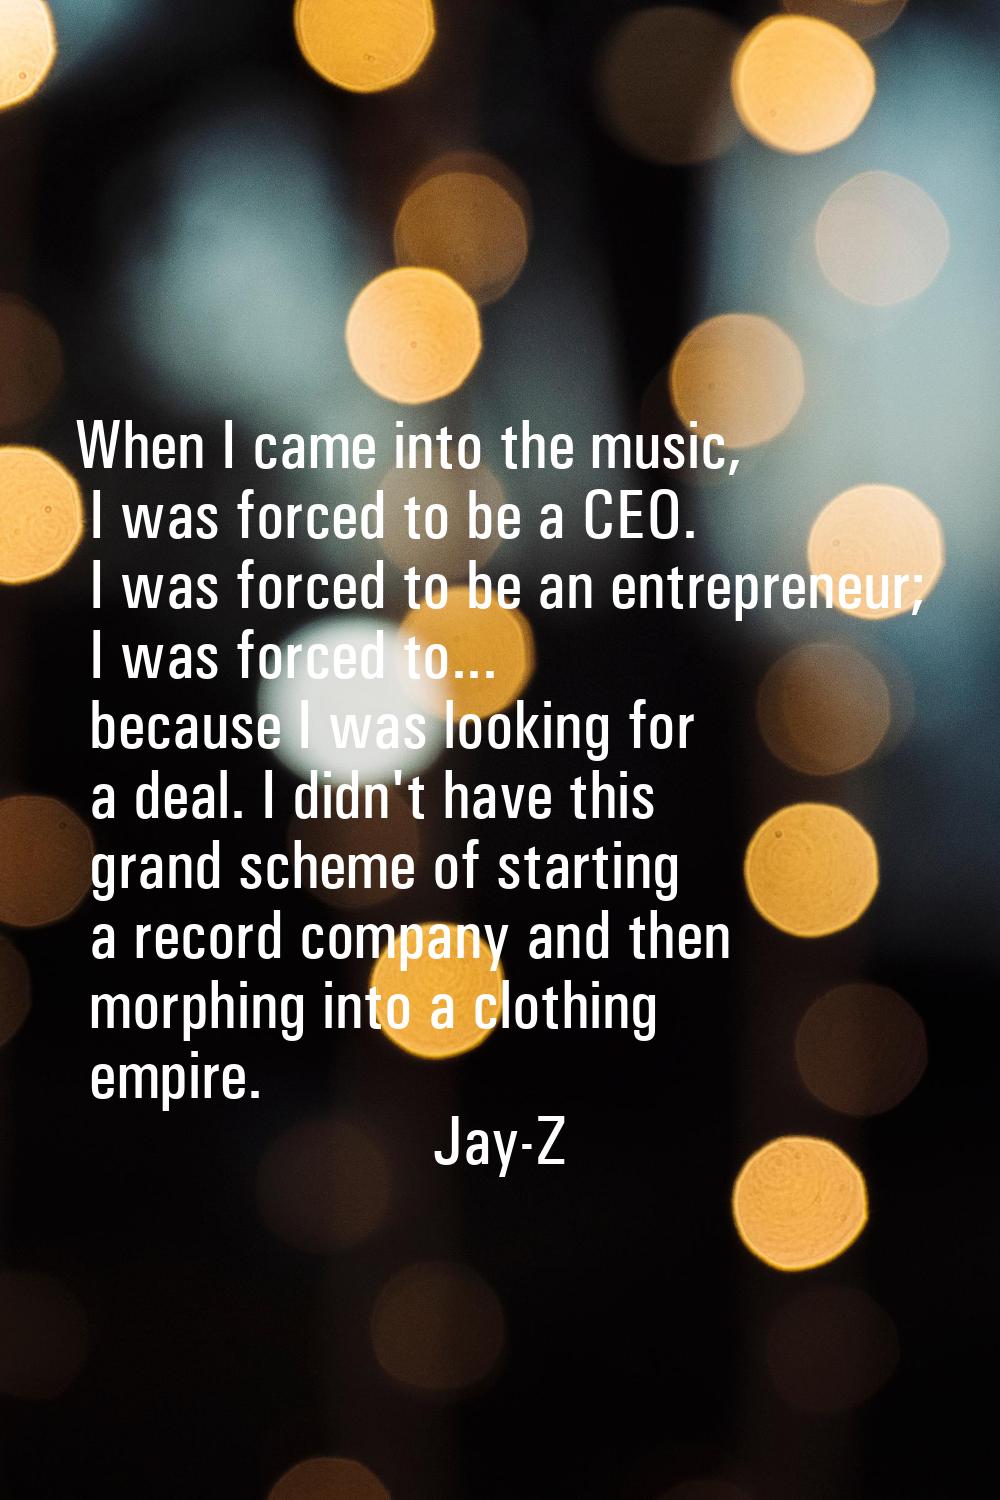 When I came into the music, I was forced to be a CEO. I was forced to be an entrepreneur; I was for